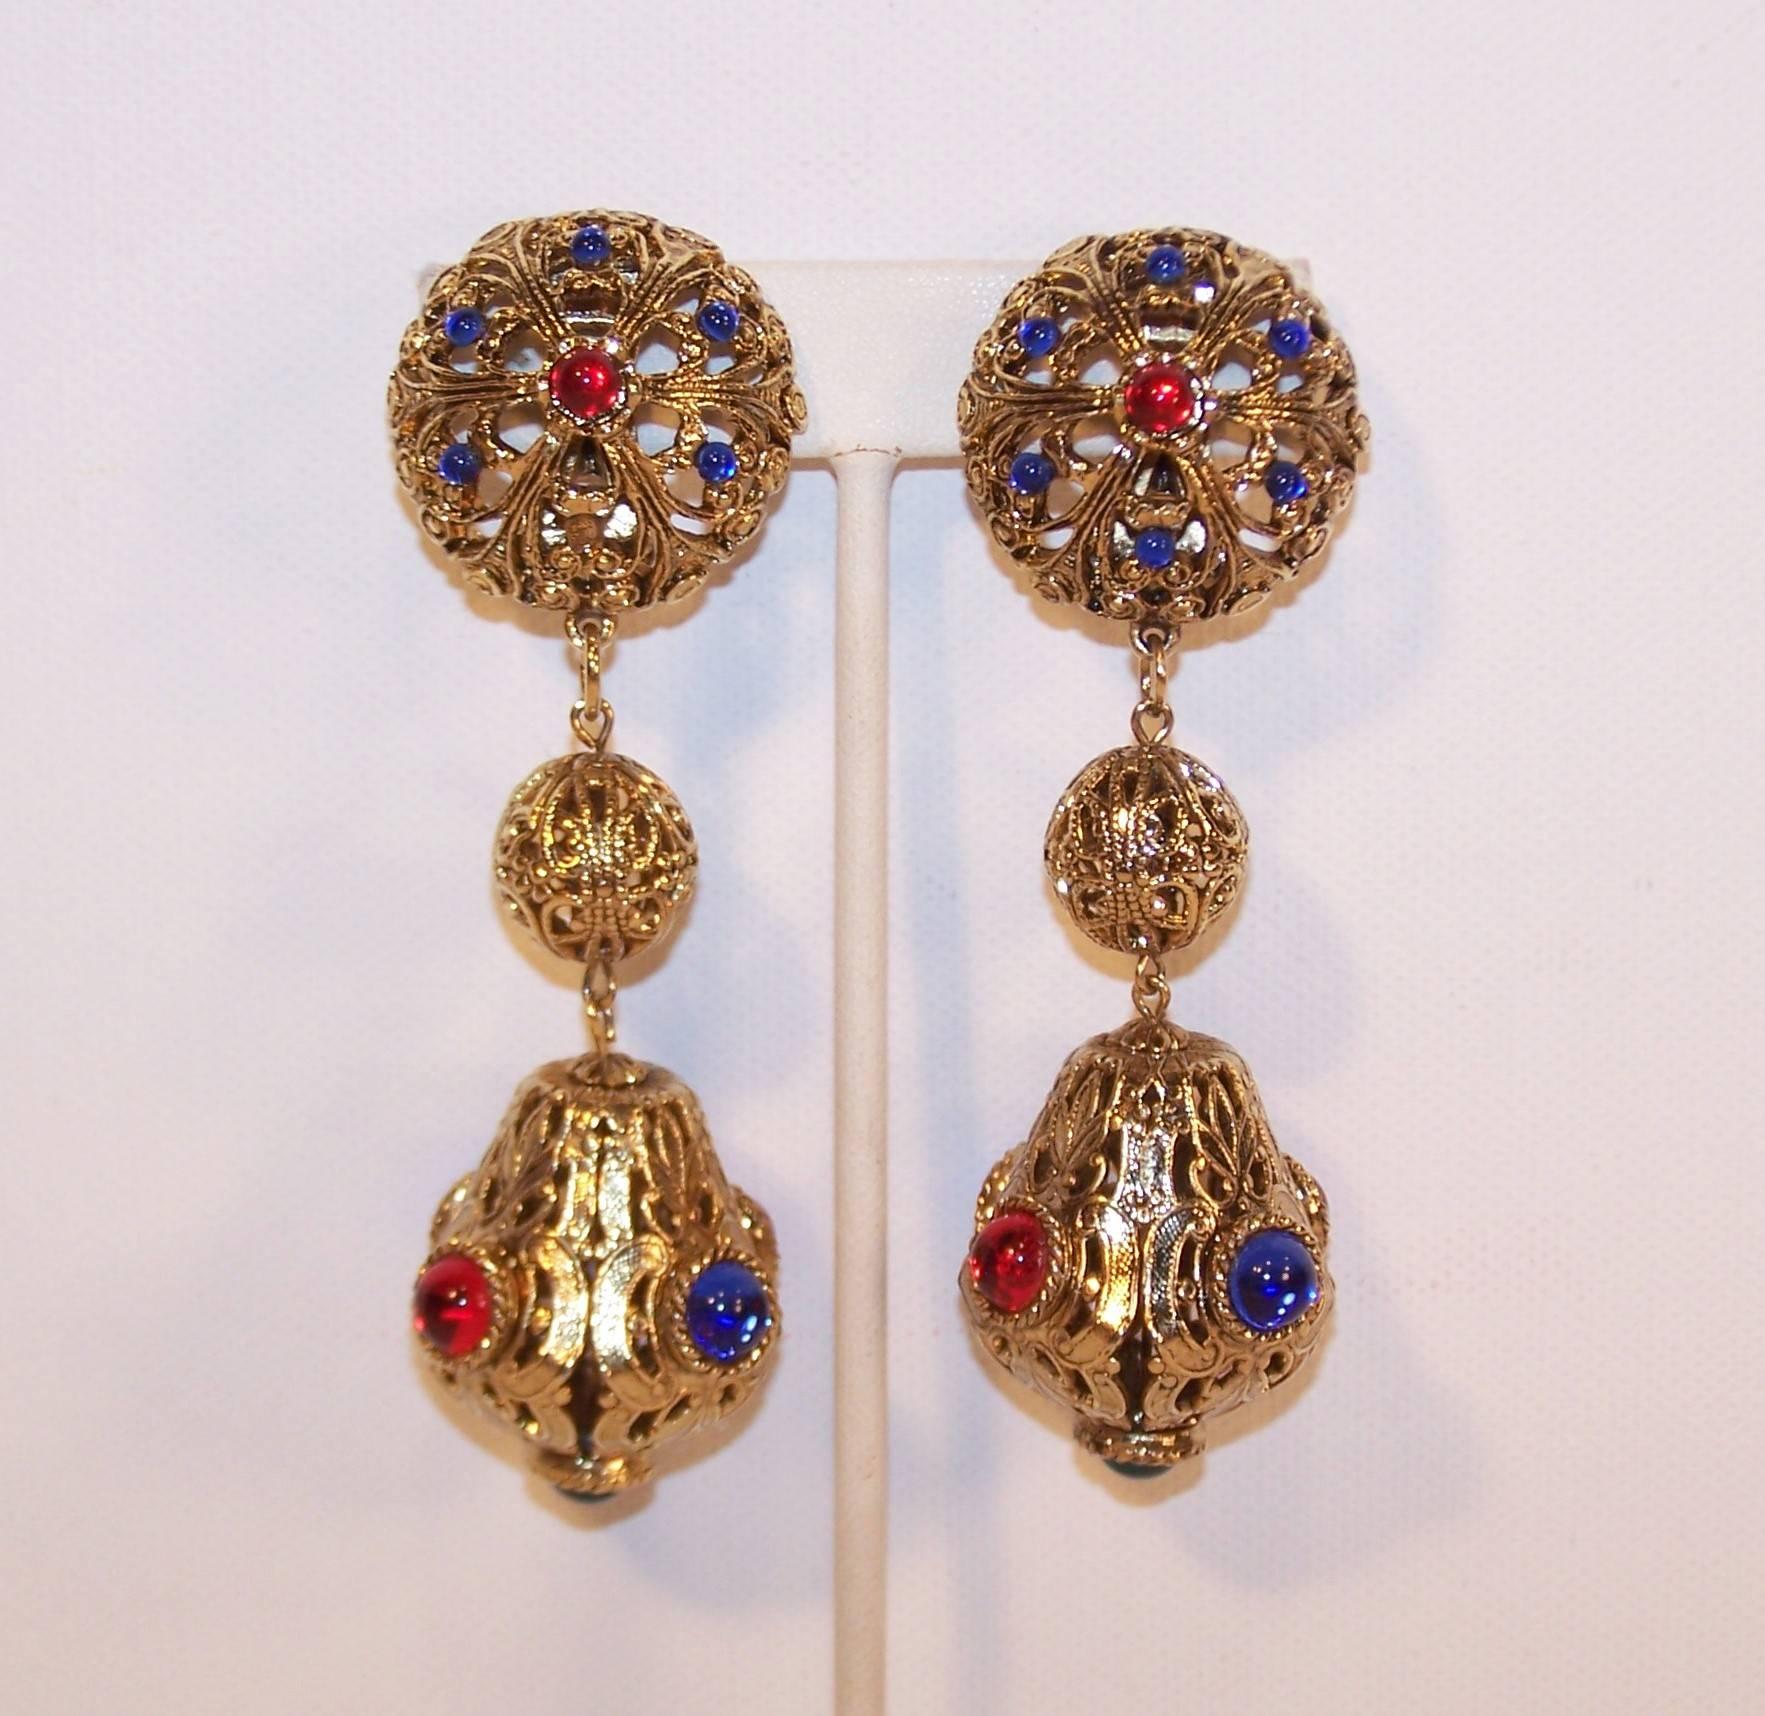 These fabulously oversized dangle earrings by Gem-Craft are reminiscent of Moroccan lanterns.  The antiqued gold tone filigree metal orbs are decorated with cabochon decorations in red and royal blue with a surprise emerald green stone on the